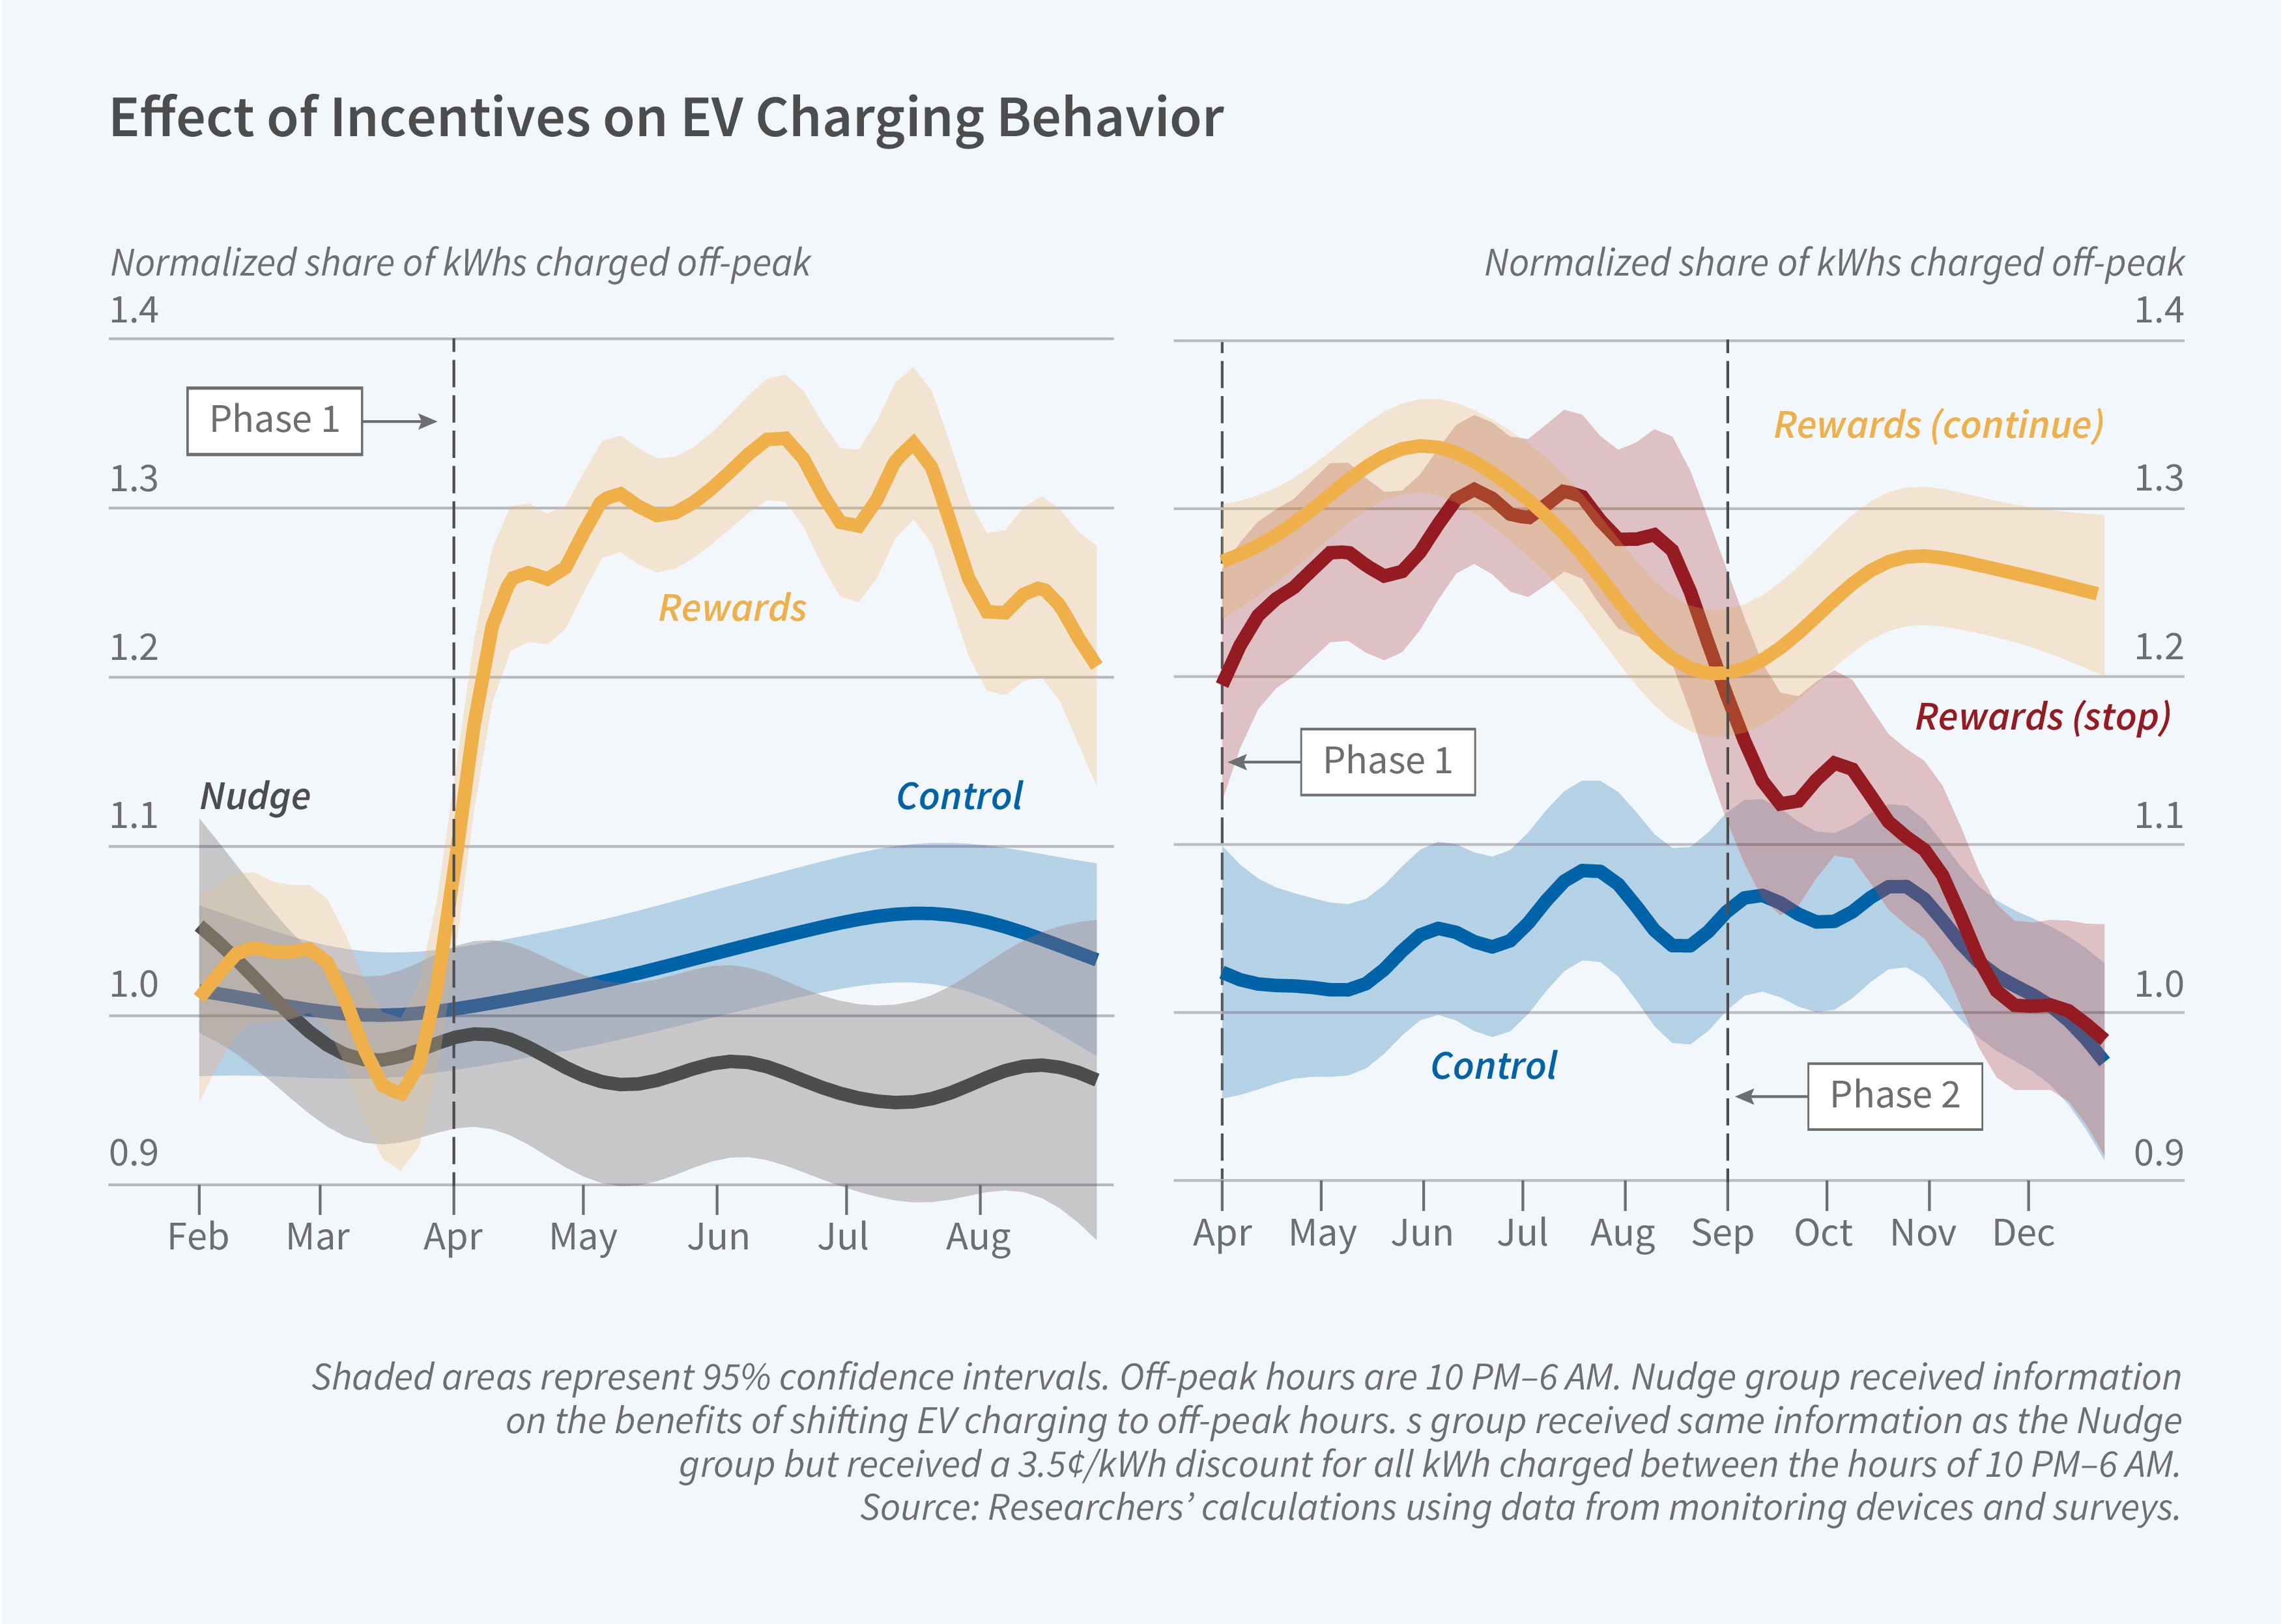 This figure is a two-panel line graph titled, Effect of Incentives of EV Charging Behavior. The following pertains to the left-side panel. The y-axis is labeled, normalized share of kWhs charged off-peak. It ranges from 0.9 to 1.4, increasing by 0.1. The x-axis represents month and ranges from February to August. There is a vertical dotted line at April labeled, Phase 1.  There are three lines labeled on the graph: Nudge, Rewards, and Control. The Nudge line starts at above 1 in February but slowly decrease to about 0.95 by August. The Rewards line starts at near 1 in February before dipping below 1 in between March and April. To the right of the vertical dotted line labeled Phase 1, the Rewards line experiences a steep increase to over 1.3 by May before experiencing fluctuations and then dropping down to about 1.2 by the end of the period. The Control line starts at near 1 in February and experiences a slight increase to about 1.05 by July.  The following pertains to the right-side panel. The y-axis is labeled, normalized share of kWhs charged off-peak. It ranges from 0.9 to 1.4, increasing by 0.1.  The x-axis represents month and ranges from April to December. There are two vertical dotted lines. One at April labeled, Phase 1, and another at September labeled, Phase 2.  There are three lines labeled on the graph: Rewards (continue), Rewards (stop), and Control. The Rewards continue line starts at near 1.3 in April. It initially increases before dropping to 1.2 in September. After September, it increases to about 1.25 and levels off. The Rewards stop line starts at 1.2 in April and fluctuates between 1.2 and 1.3 until Phase 2 in September. After September, the line steeply declines to about 1 in December. The control line fluctuates between 1 and 1.1 for whole period. The follow pertains to both panels. Shaded areas represent 95% confidence intervals. Off-peak hours are 10 PM–6 AM. Nudge group received information on the benefits of shifting EV charging to off-peak hours. Rewards group received same information 